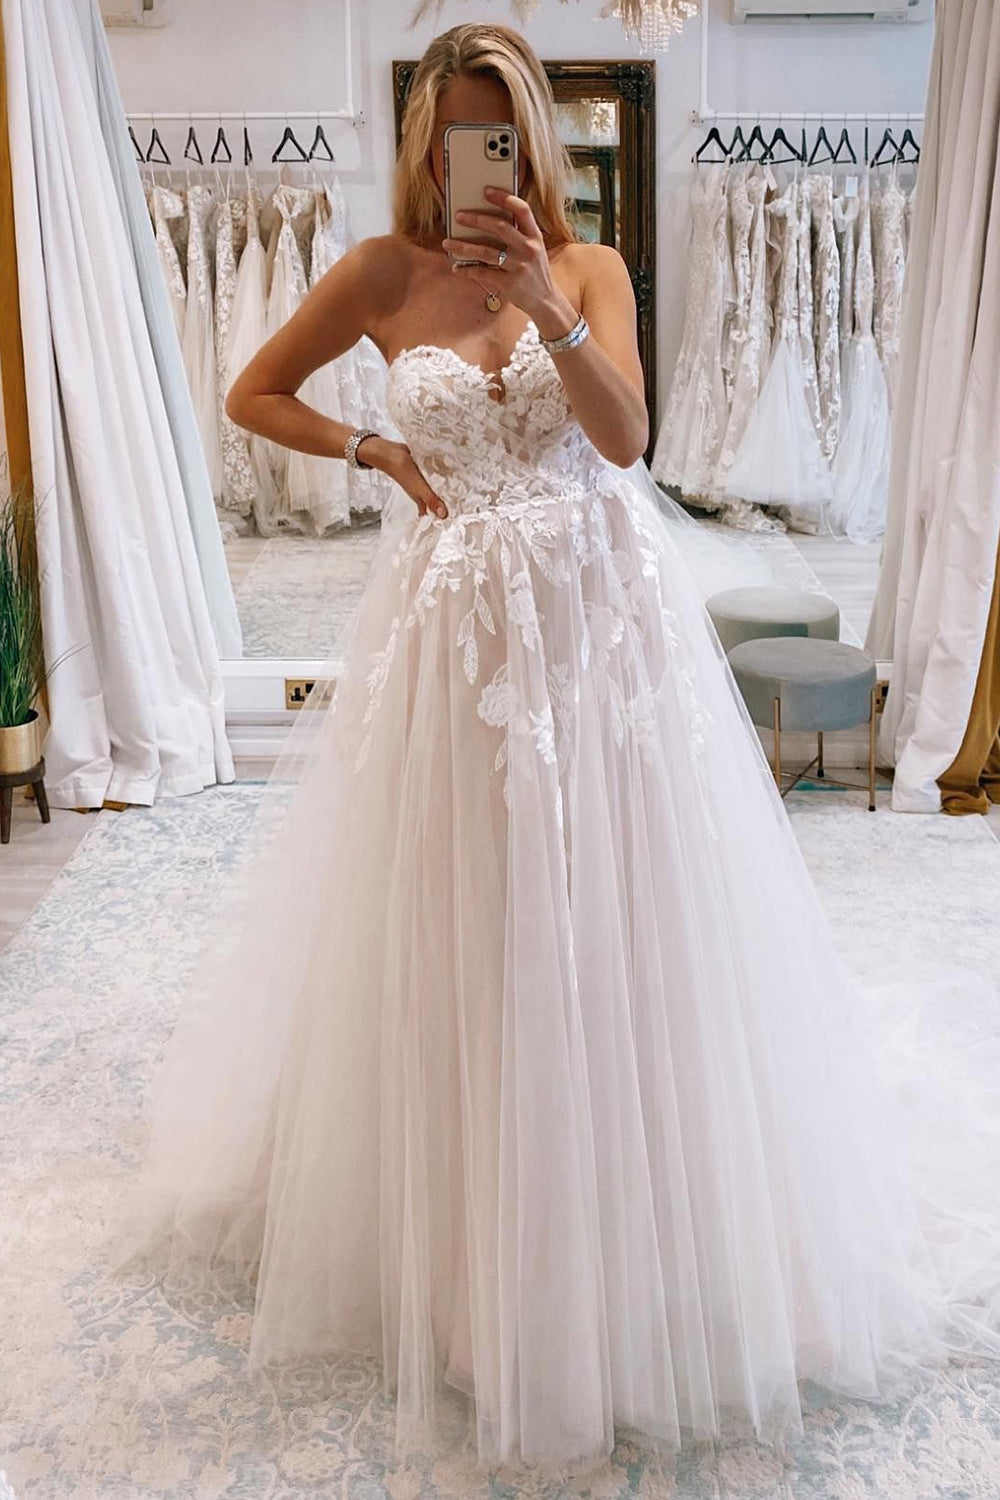 Zaria | Ivory Long Tulle A-Line Wedding Dress with Lace